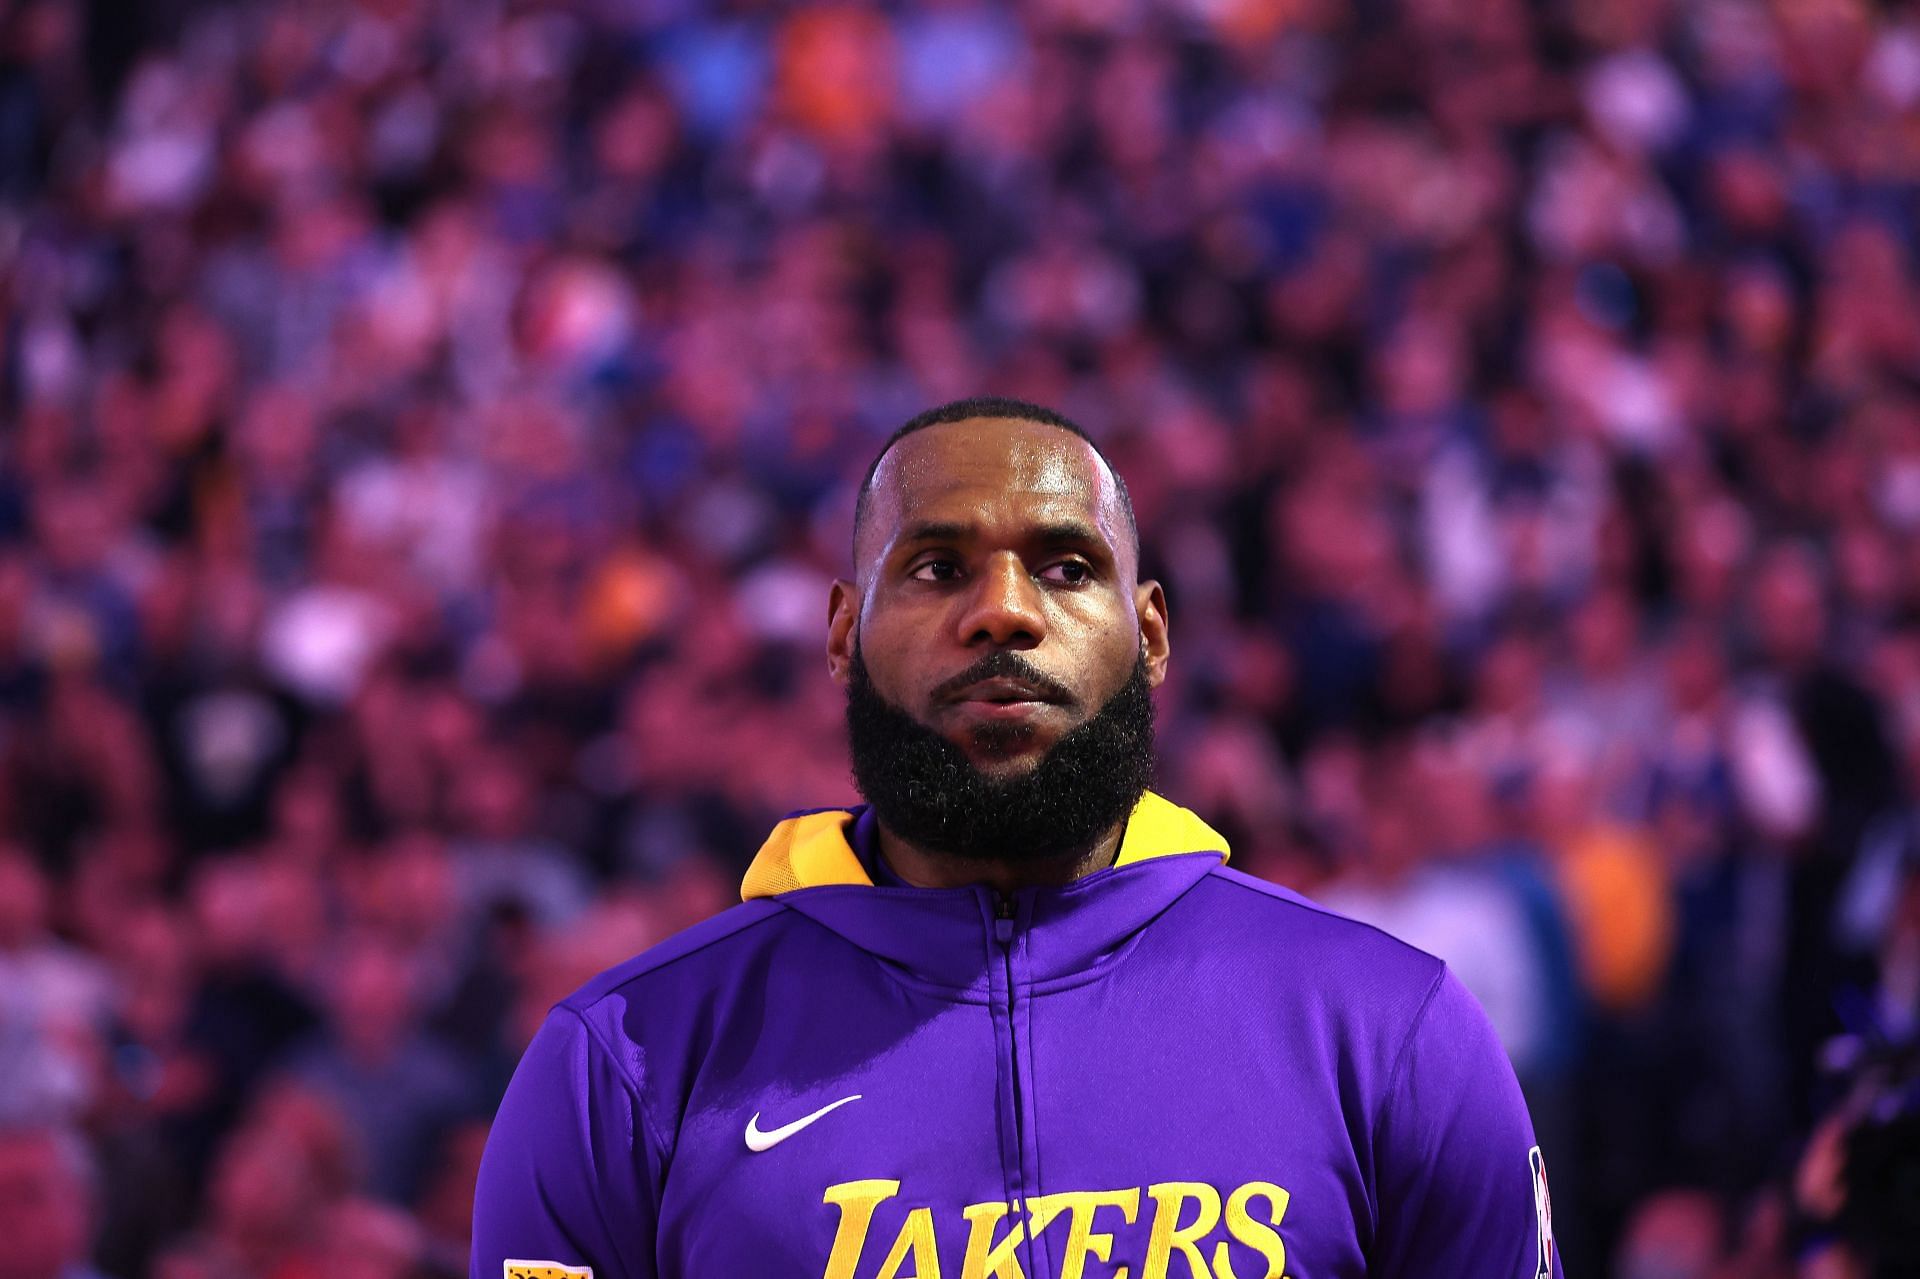 LeBron James of the Lakers.